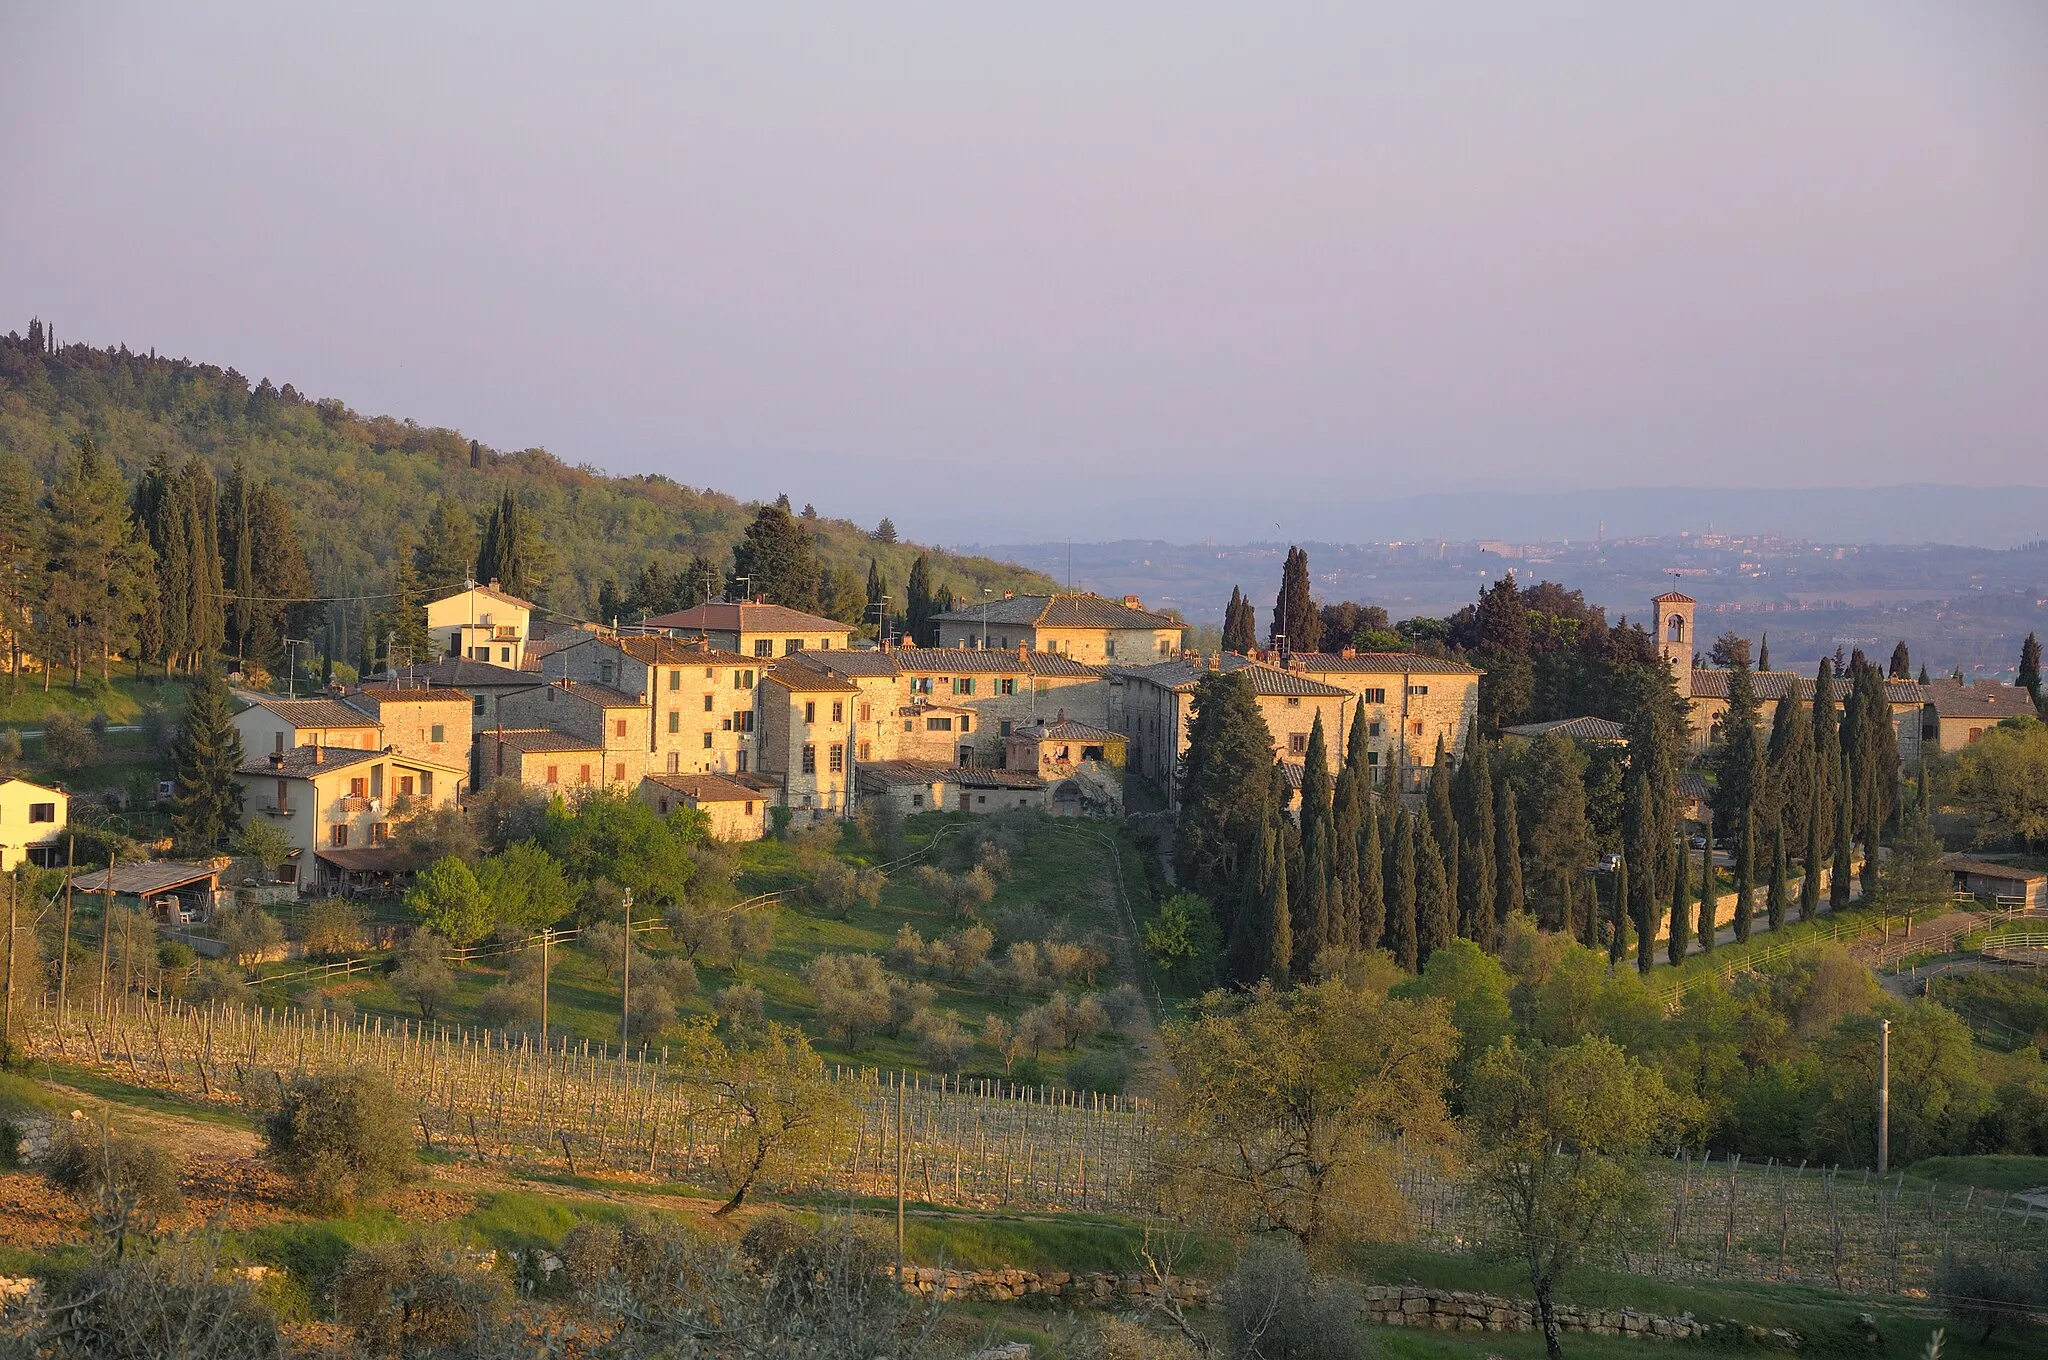 Photo showing: View of the hamlet Fonterutoli, a frazione of Castellina in Chianti, Tuscany, Italy.  View from north-north-west shortly before sunset.  In the background you can see Siena. Hint: The original Flickr file name and description identify the hamlet as Panzano, but the photo shows Fonterutoli.